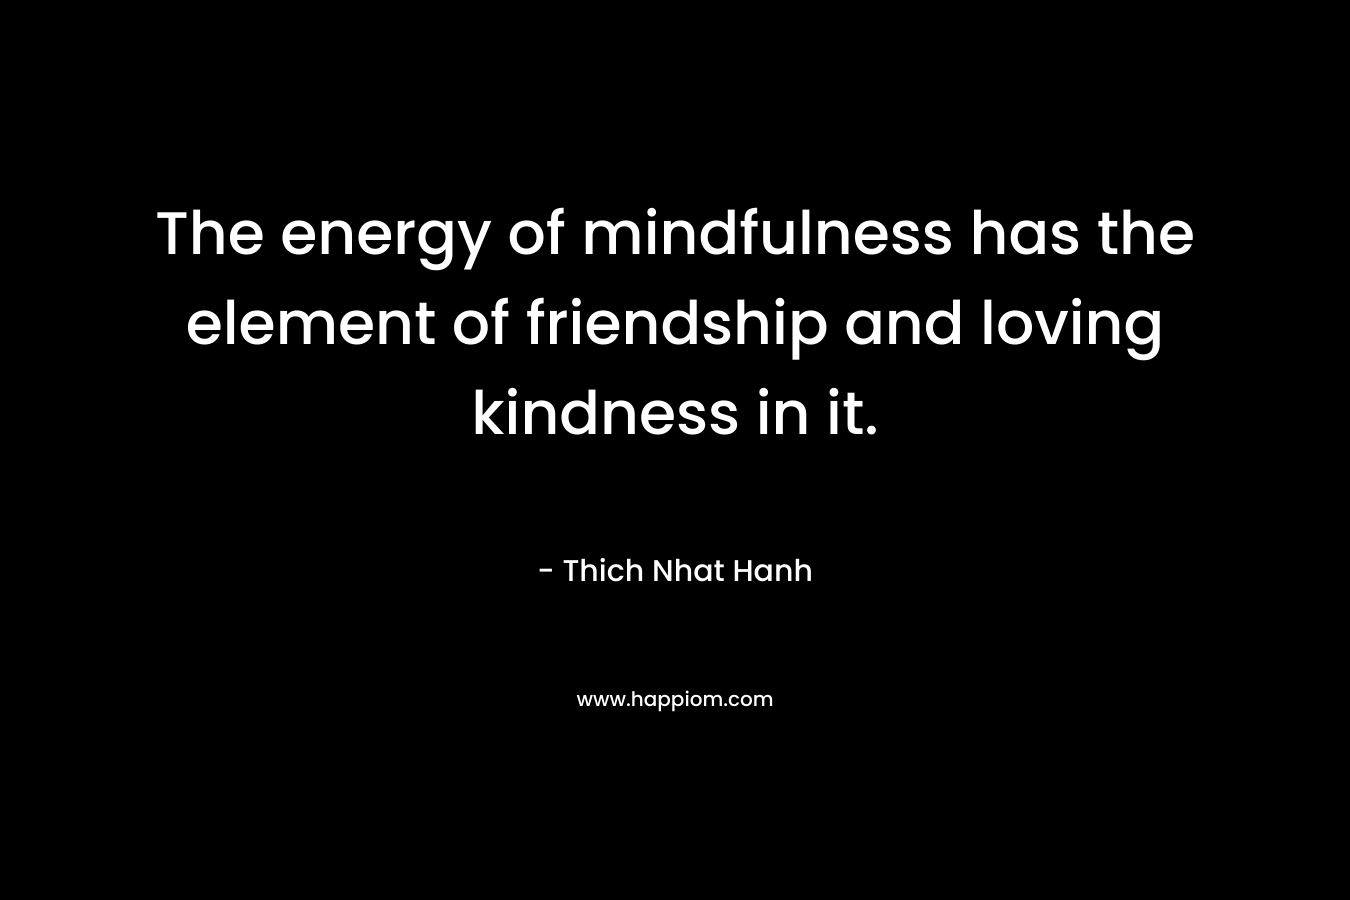 The energy of mindfulness has the element of friendship and loving kindness in it.